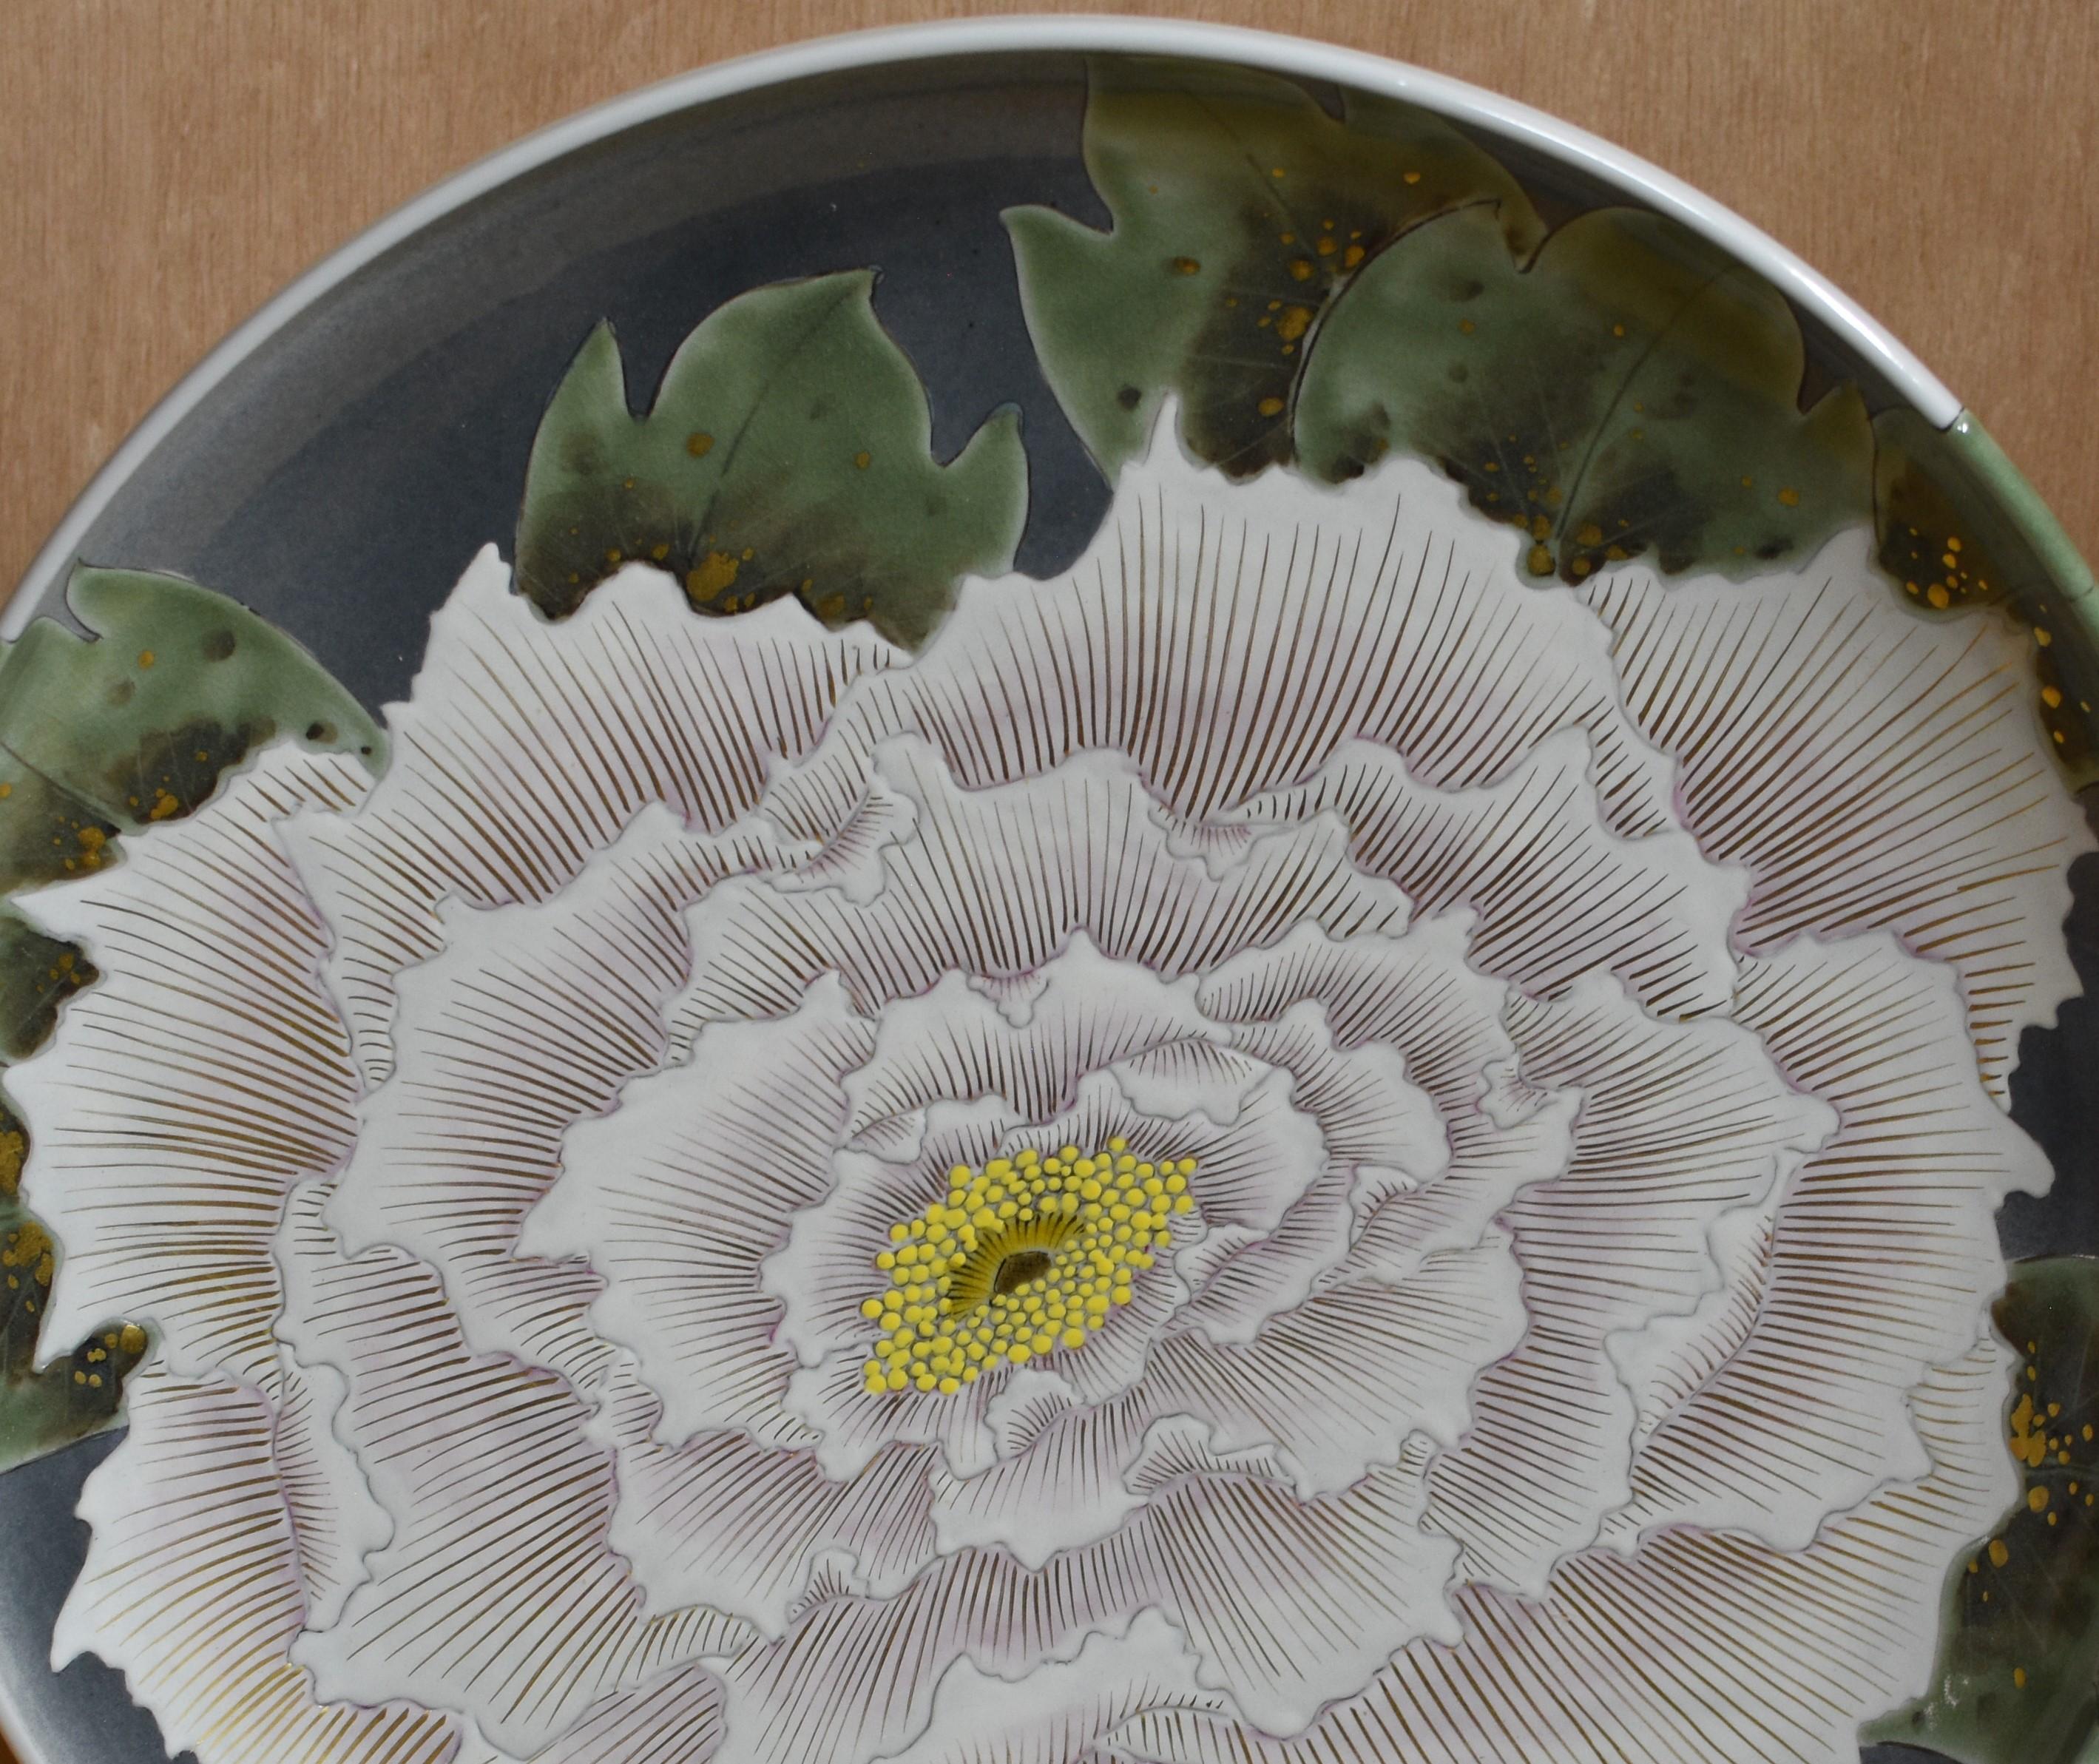 Extraordinary Japanese large contemporary decorative Kutani porcelain deep charger/centerpiece, extremely intricately hand painted in an attractive cream color on different hues of green. It is a masterpiece by a Kutani master artist whose signature